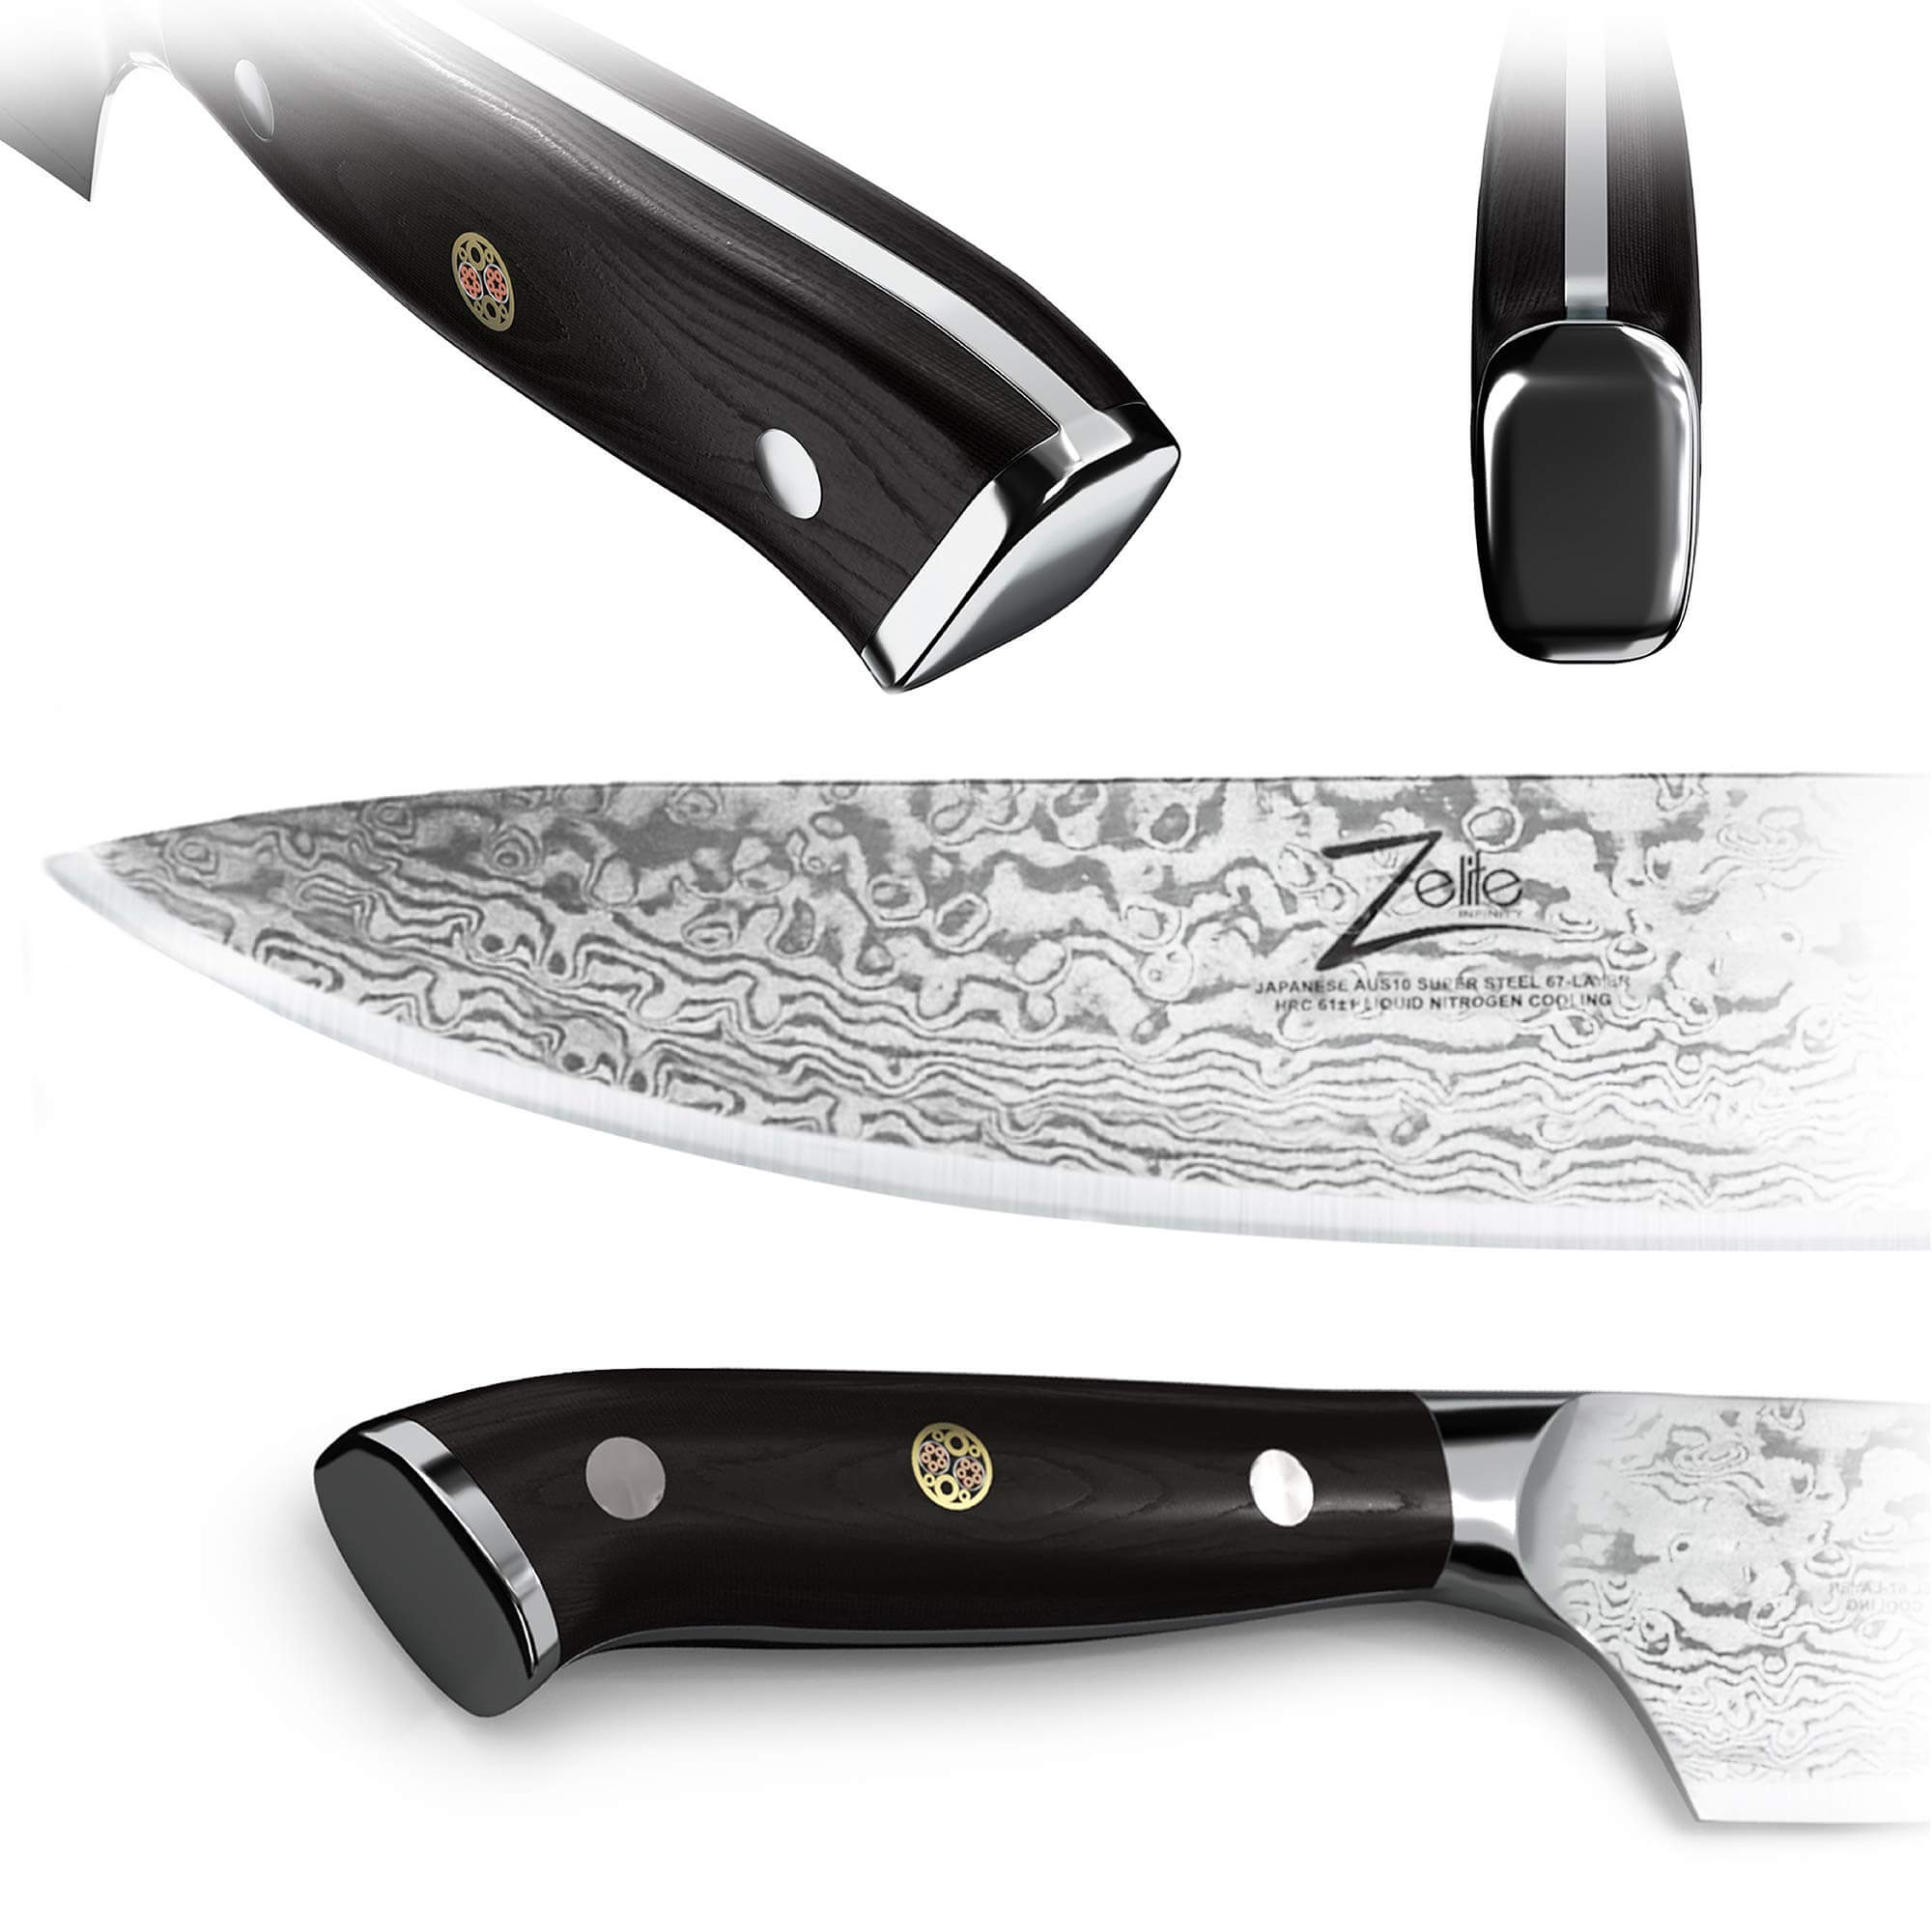 Zelite Infinity Chef Knife 8 Inch, Best Japanese chef knives, best knifes